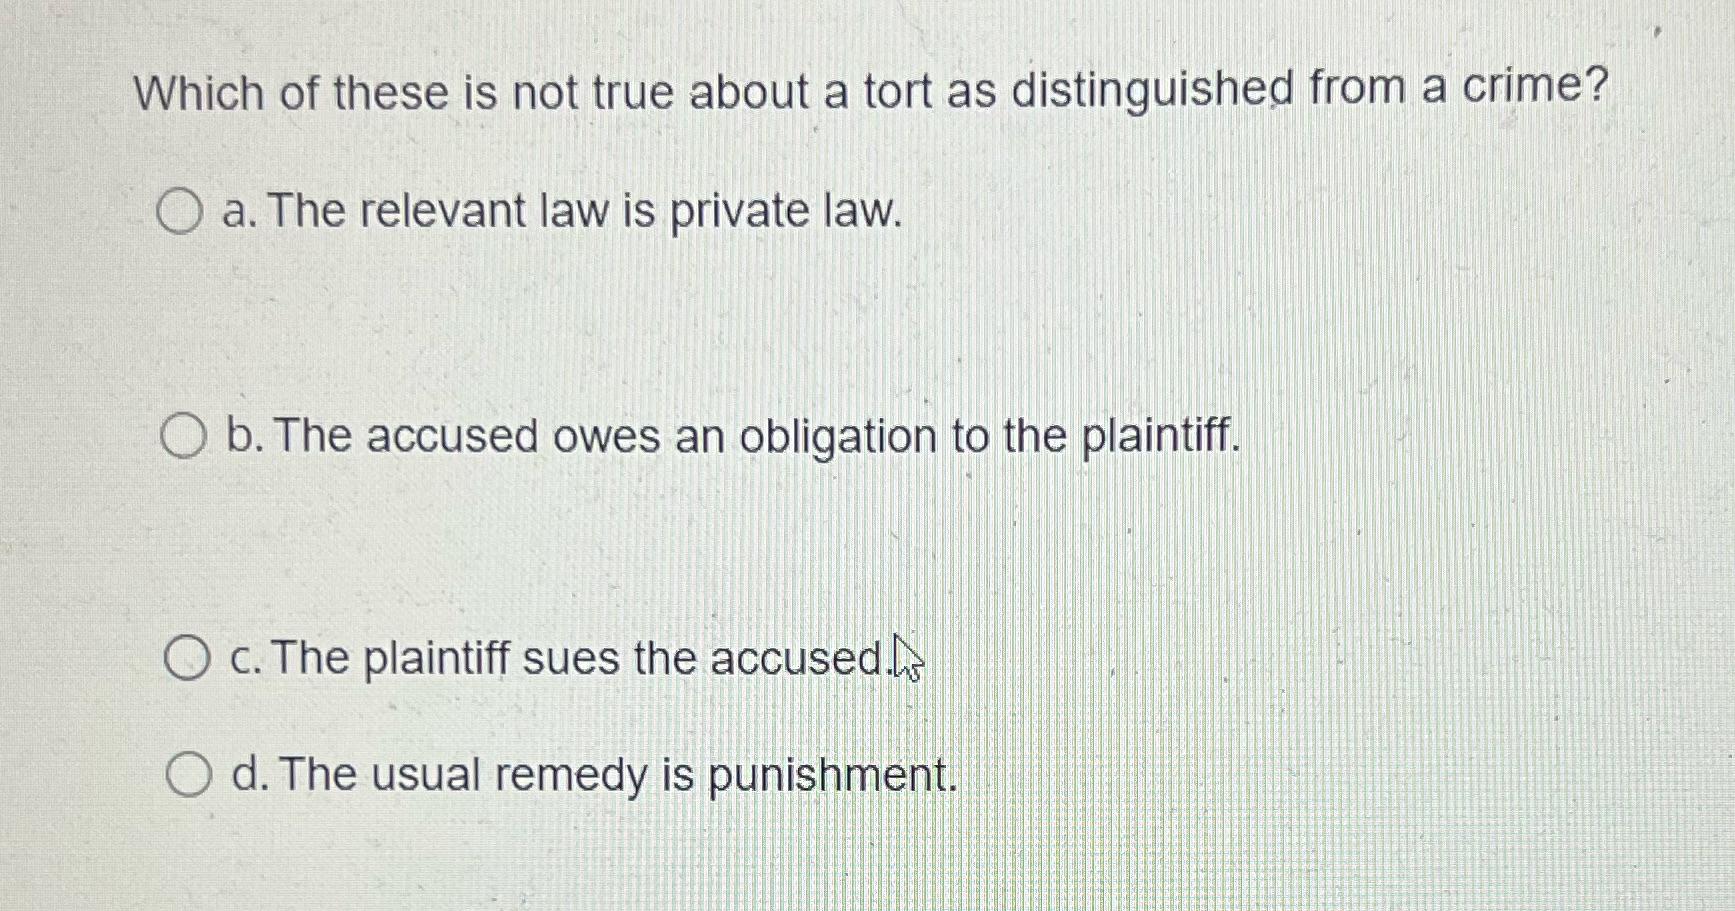 Which of these is not true about a tort as distinguished from a crime? O a. The relevant law is private law.